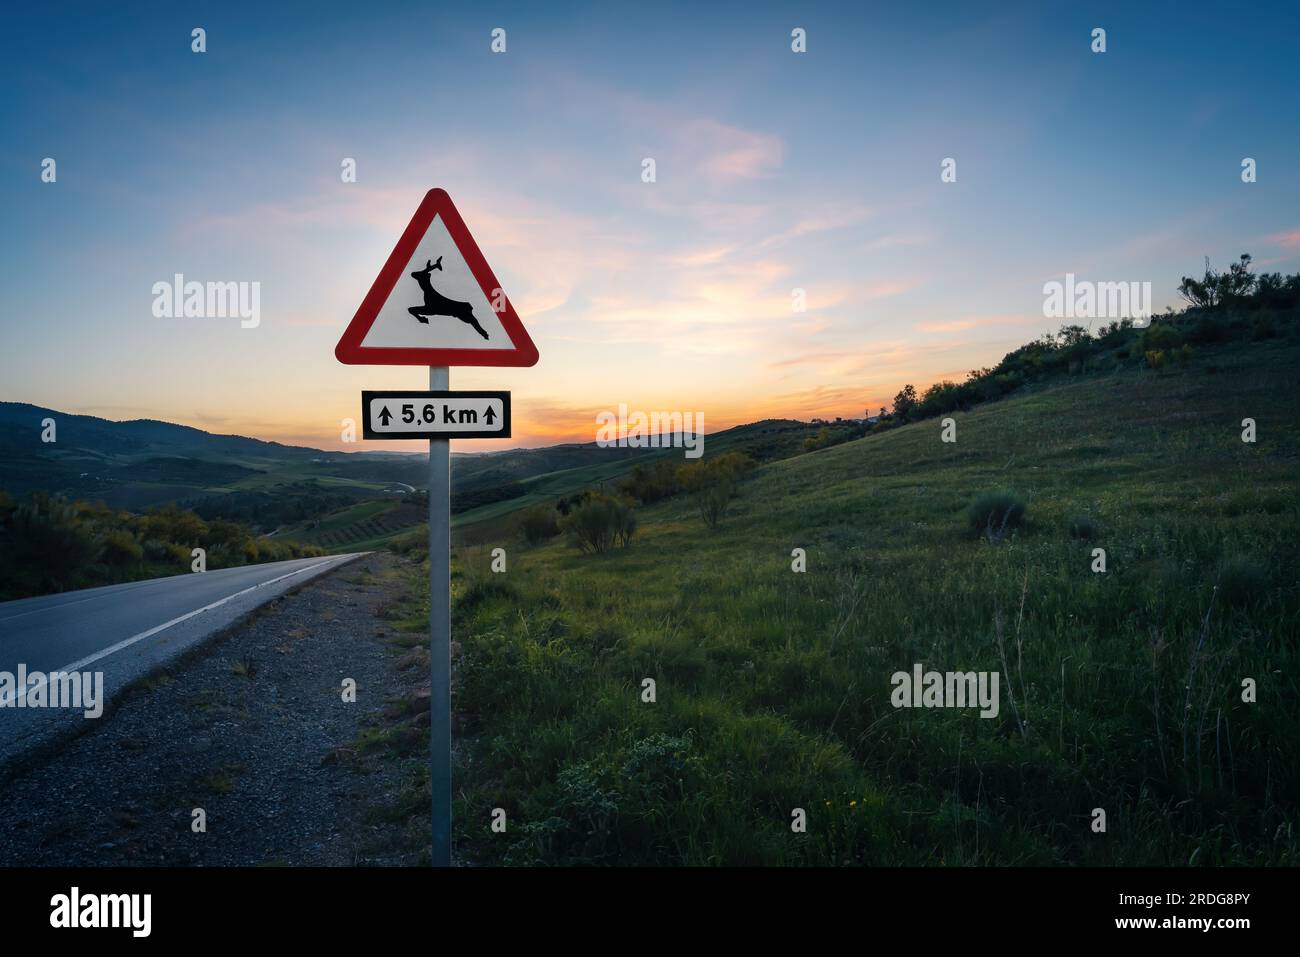 Wild Animals warning traffic sign on a road at sunset - Zahara de la Sierra, Andalusia, Spain Stock Photo